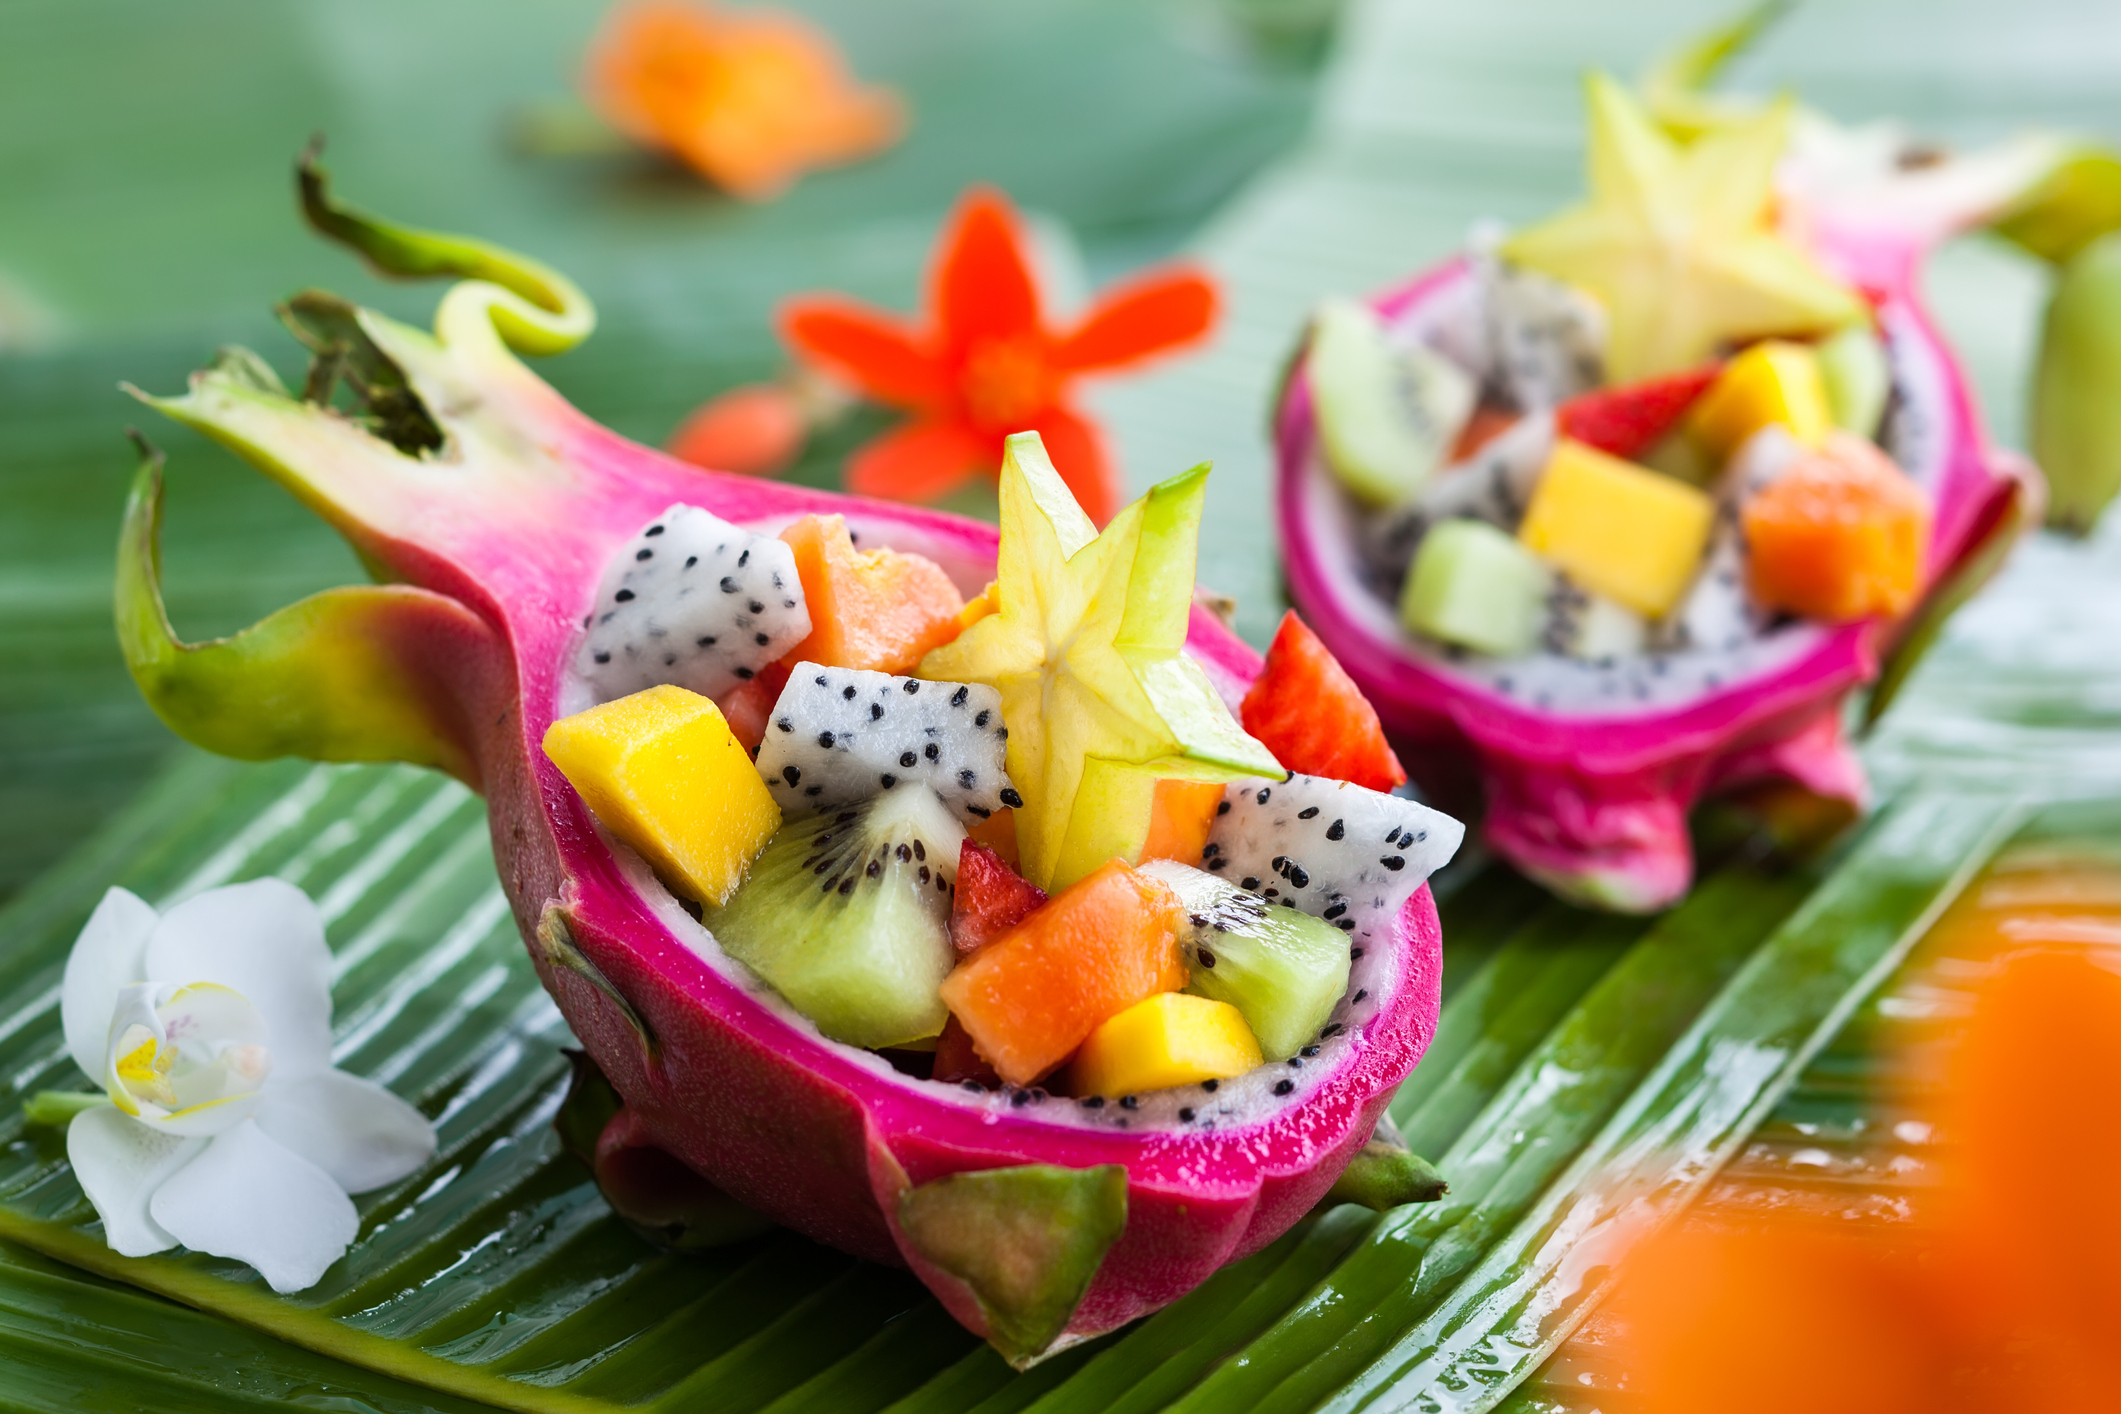 11 exotic superfruits with supersized nutrition